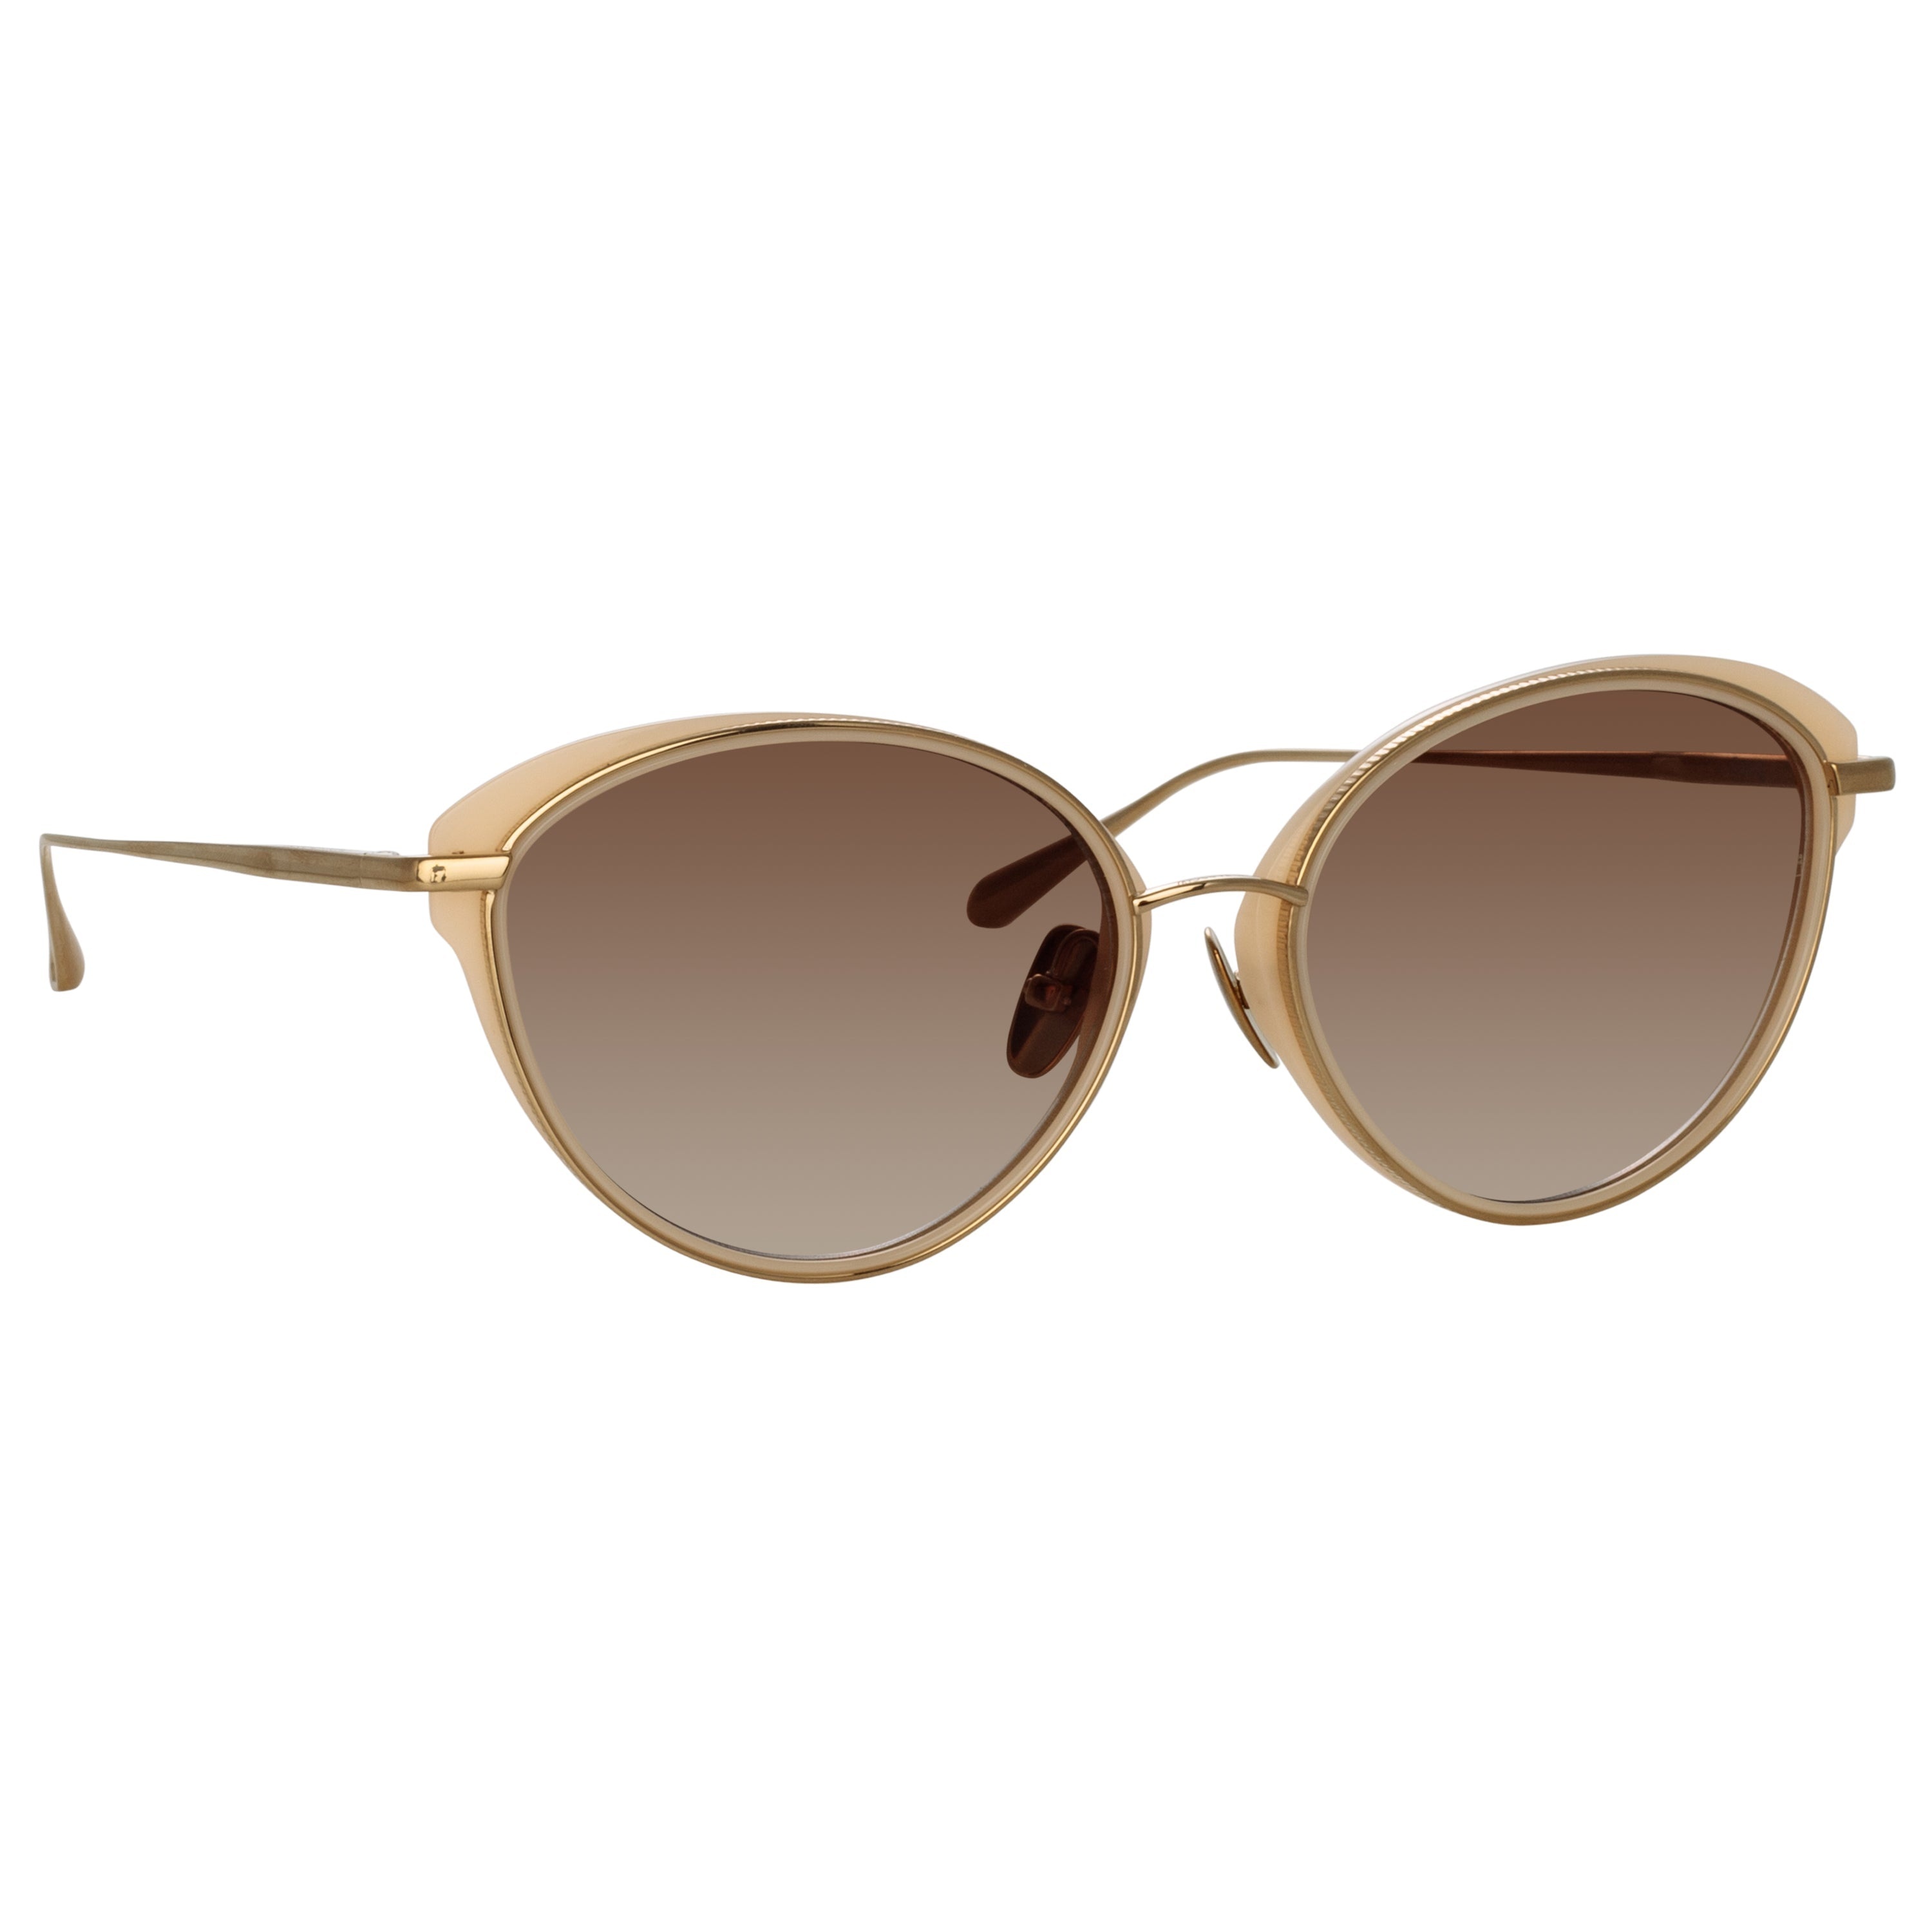 SONG CAT EYE SUNGLASSES IN LIGHT GOLD AND PEACH - 3